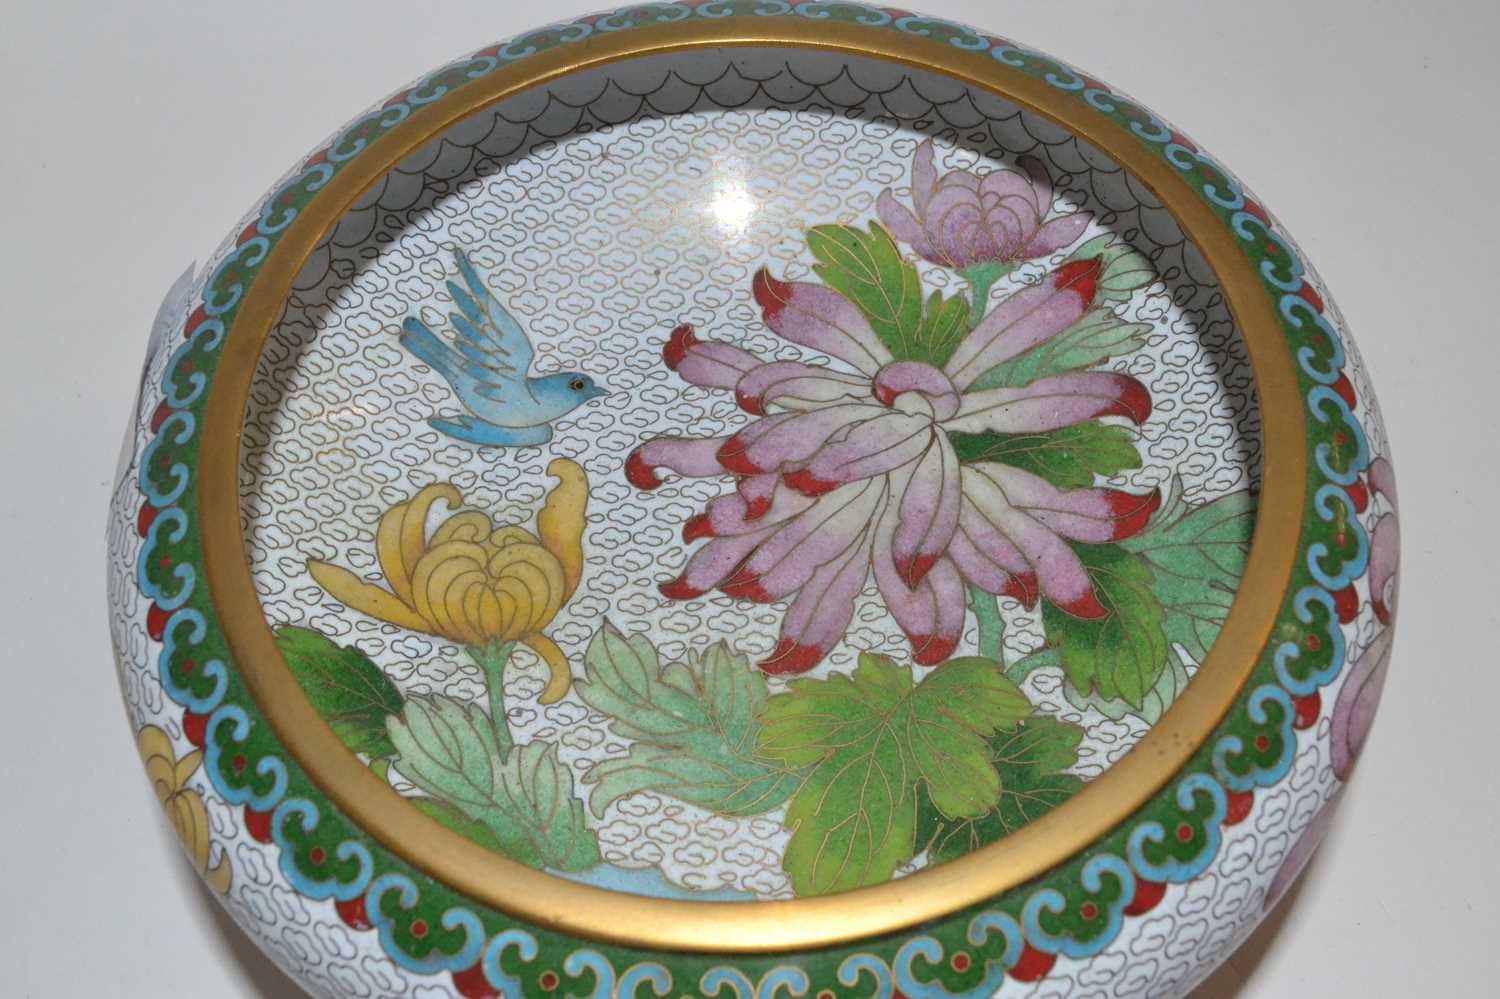 A modern Cloisonne bowl and stand, the bowl decorated with a floral design, 18cm high - Image 3 of 4